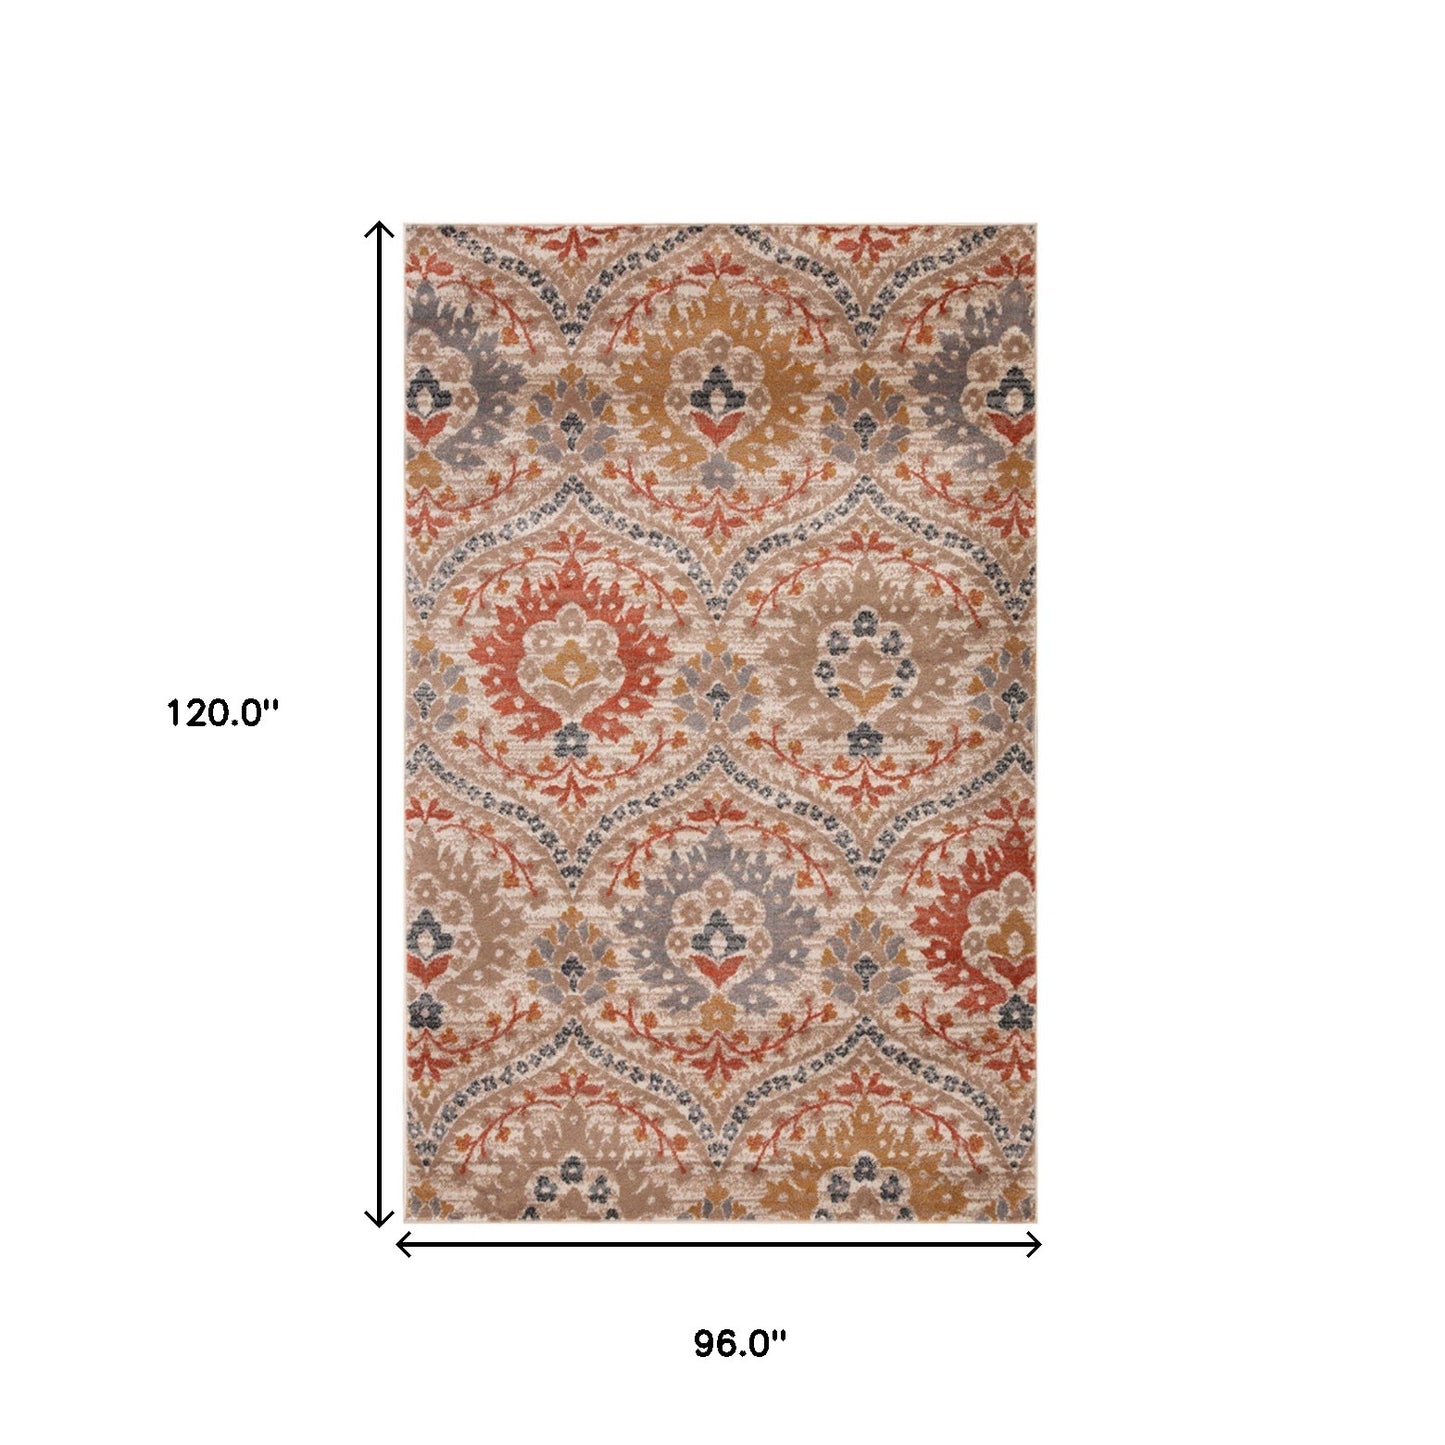 8' X 10' Ivory Orange And Gray Floral Stain Resistant Area Rug